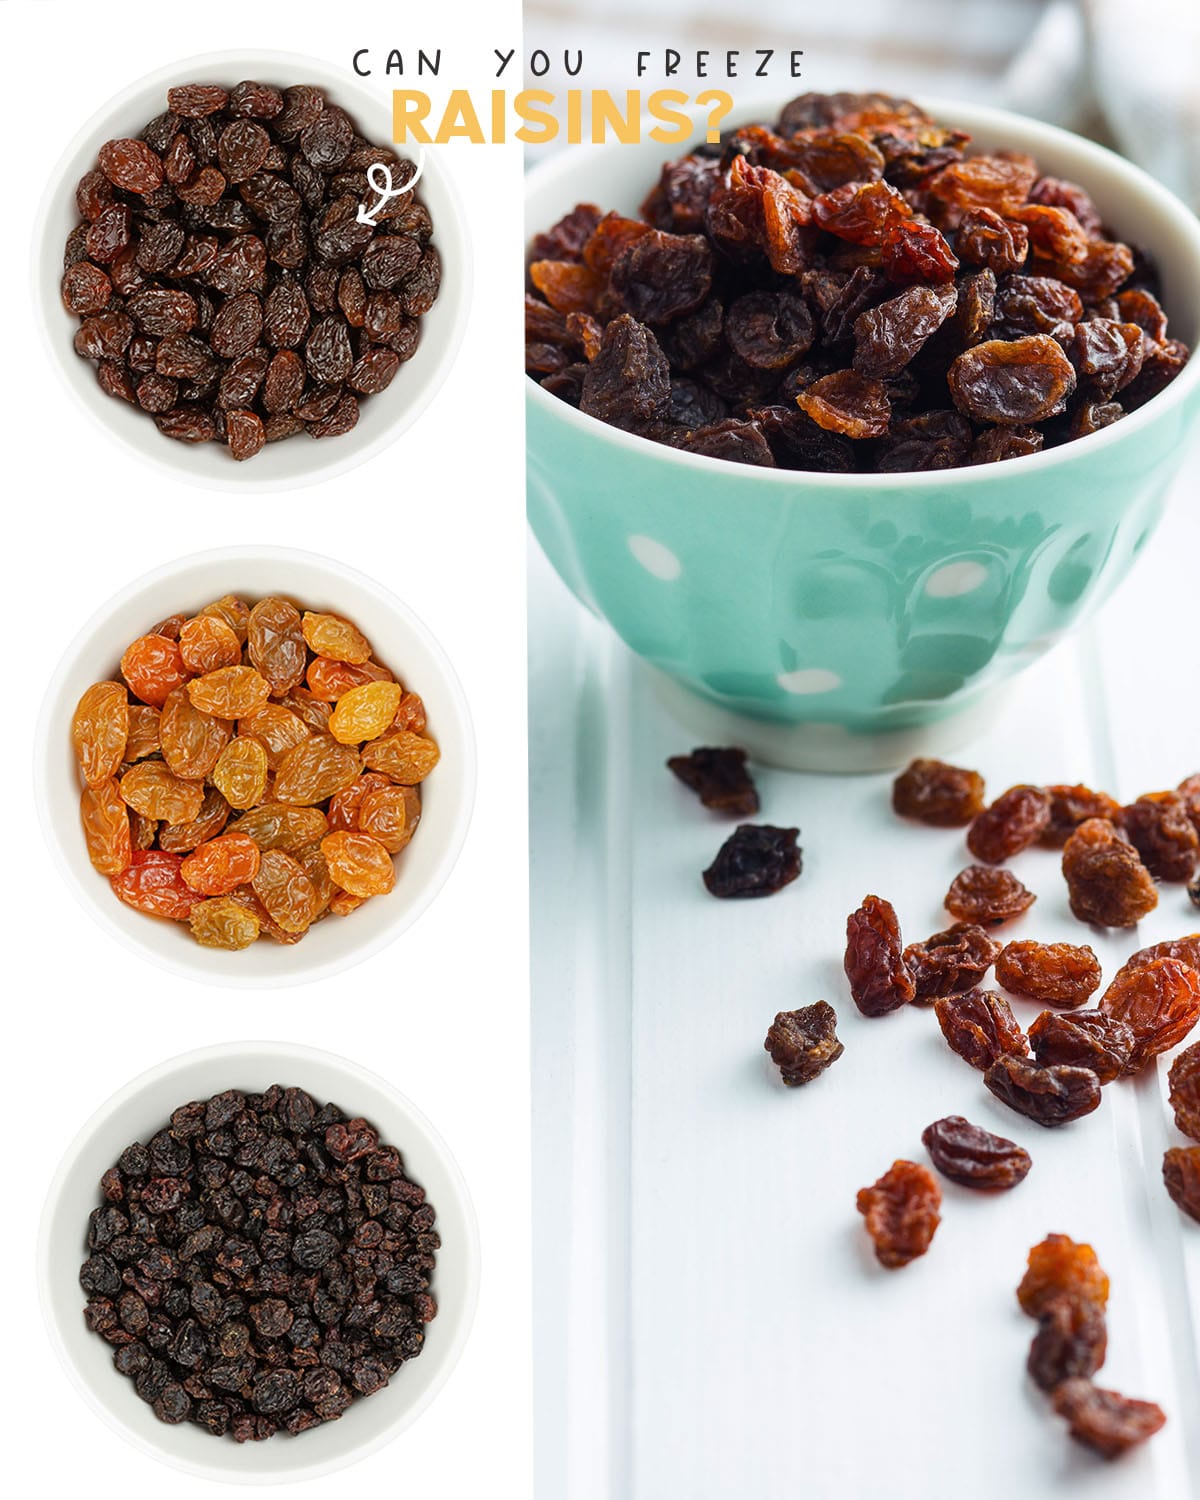 Freezing raisins is a great way to keep them fresh and ready to use when you need them. The best way to freeze raisins is by using an airtight container.